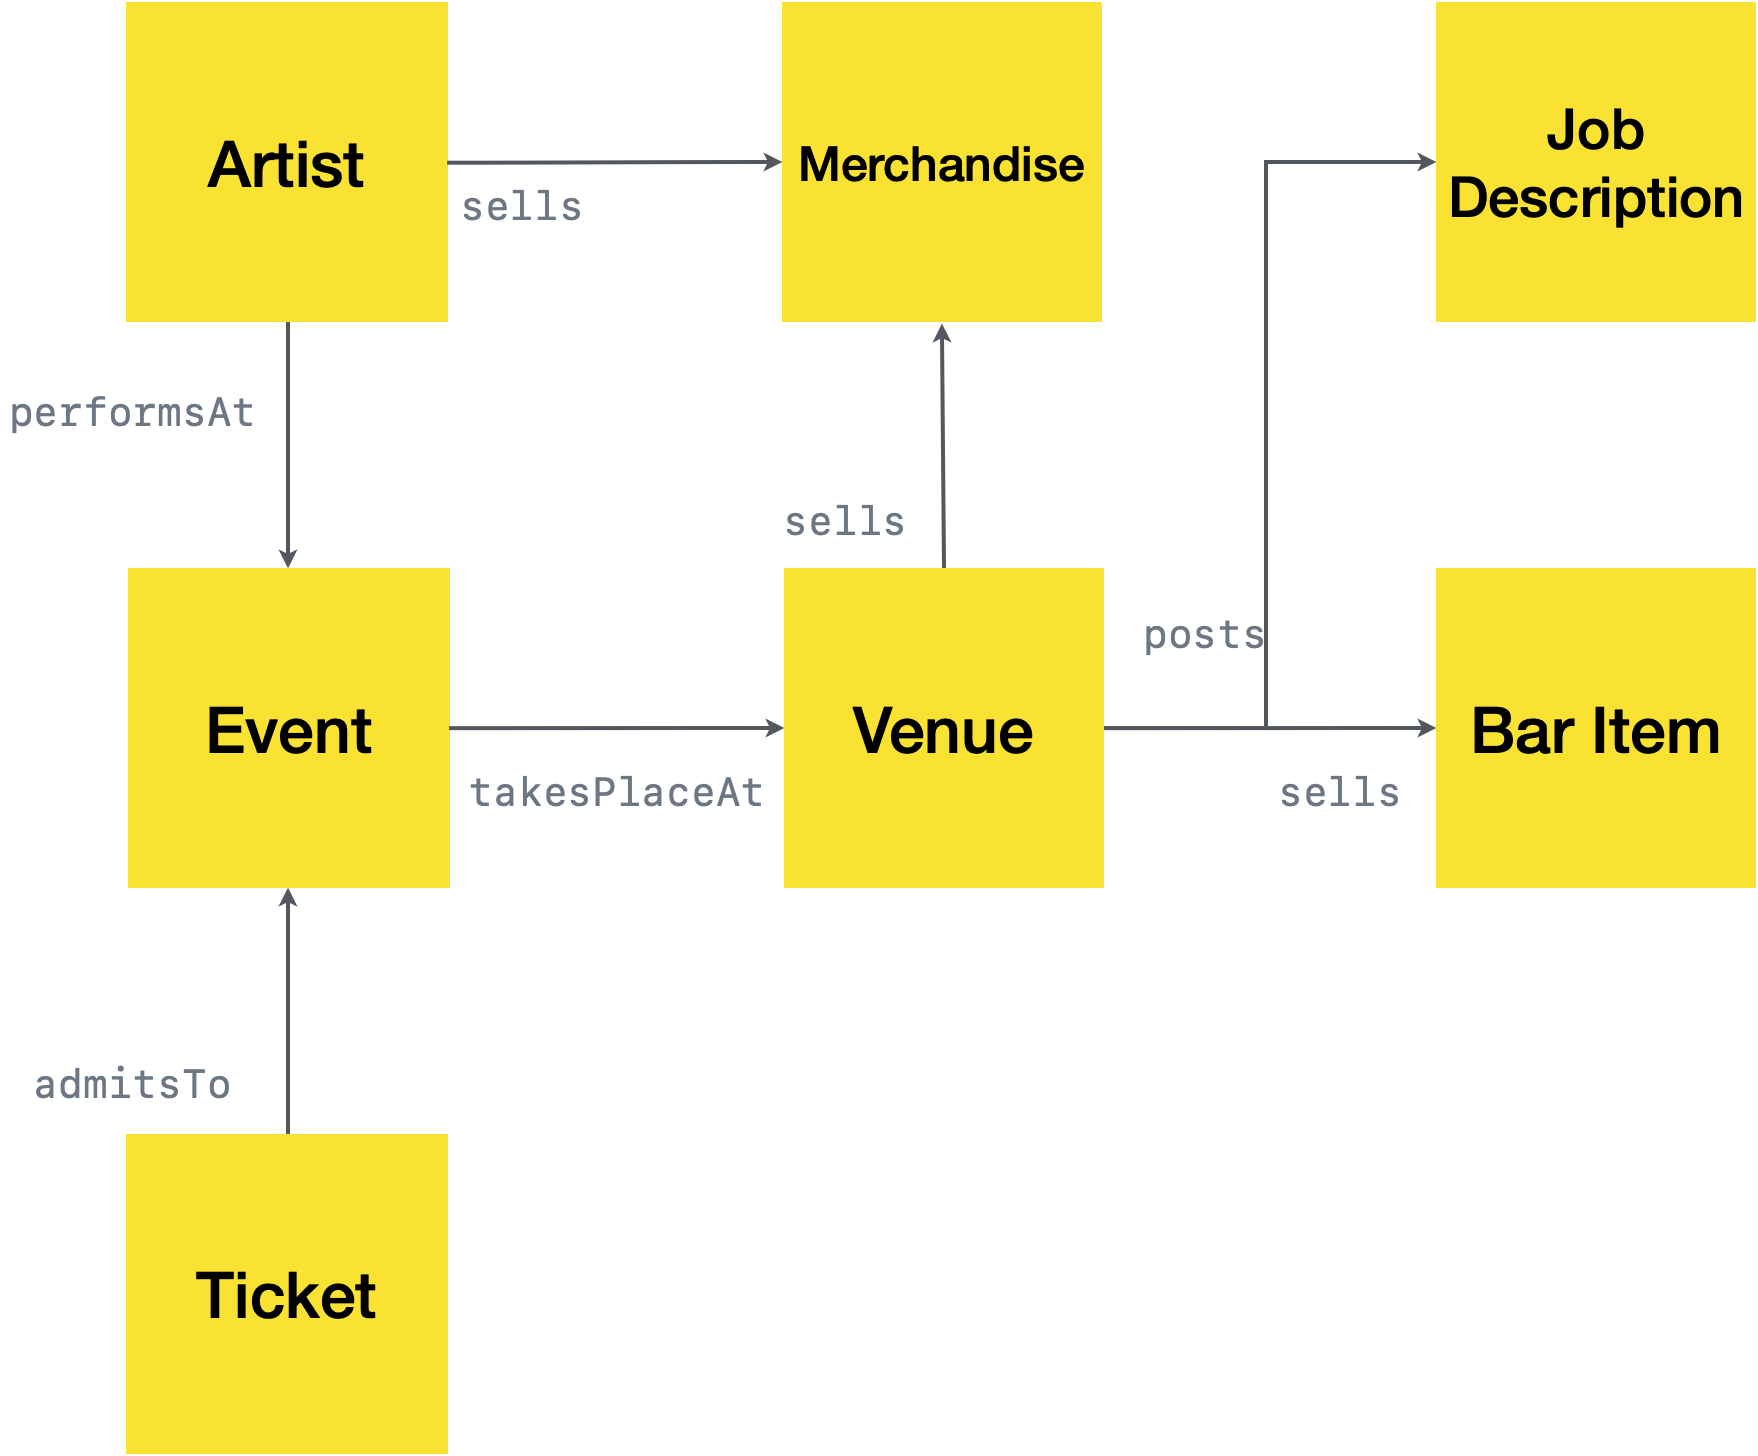 Content model showing Ticket admitTo Event, Artist performsAt Event and sells Merchandise, Event takesPlaceAt Venue, Venue sells Merchandise and Bar Item and posts Job Description.